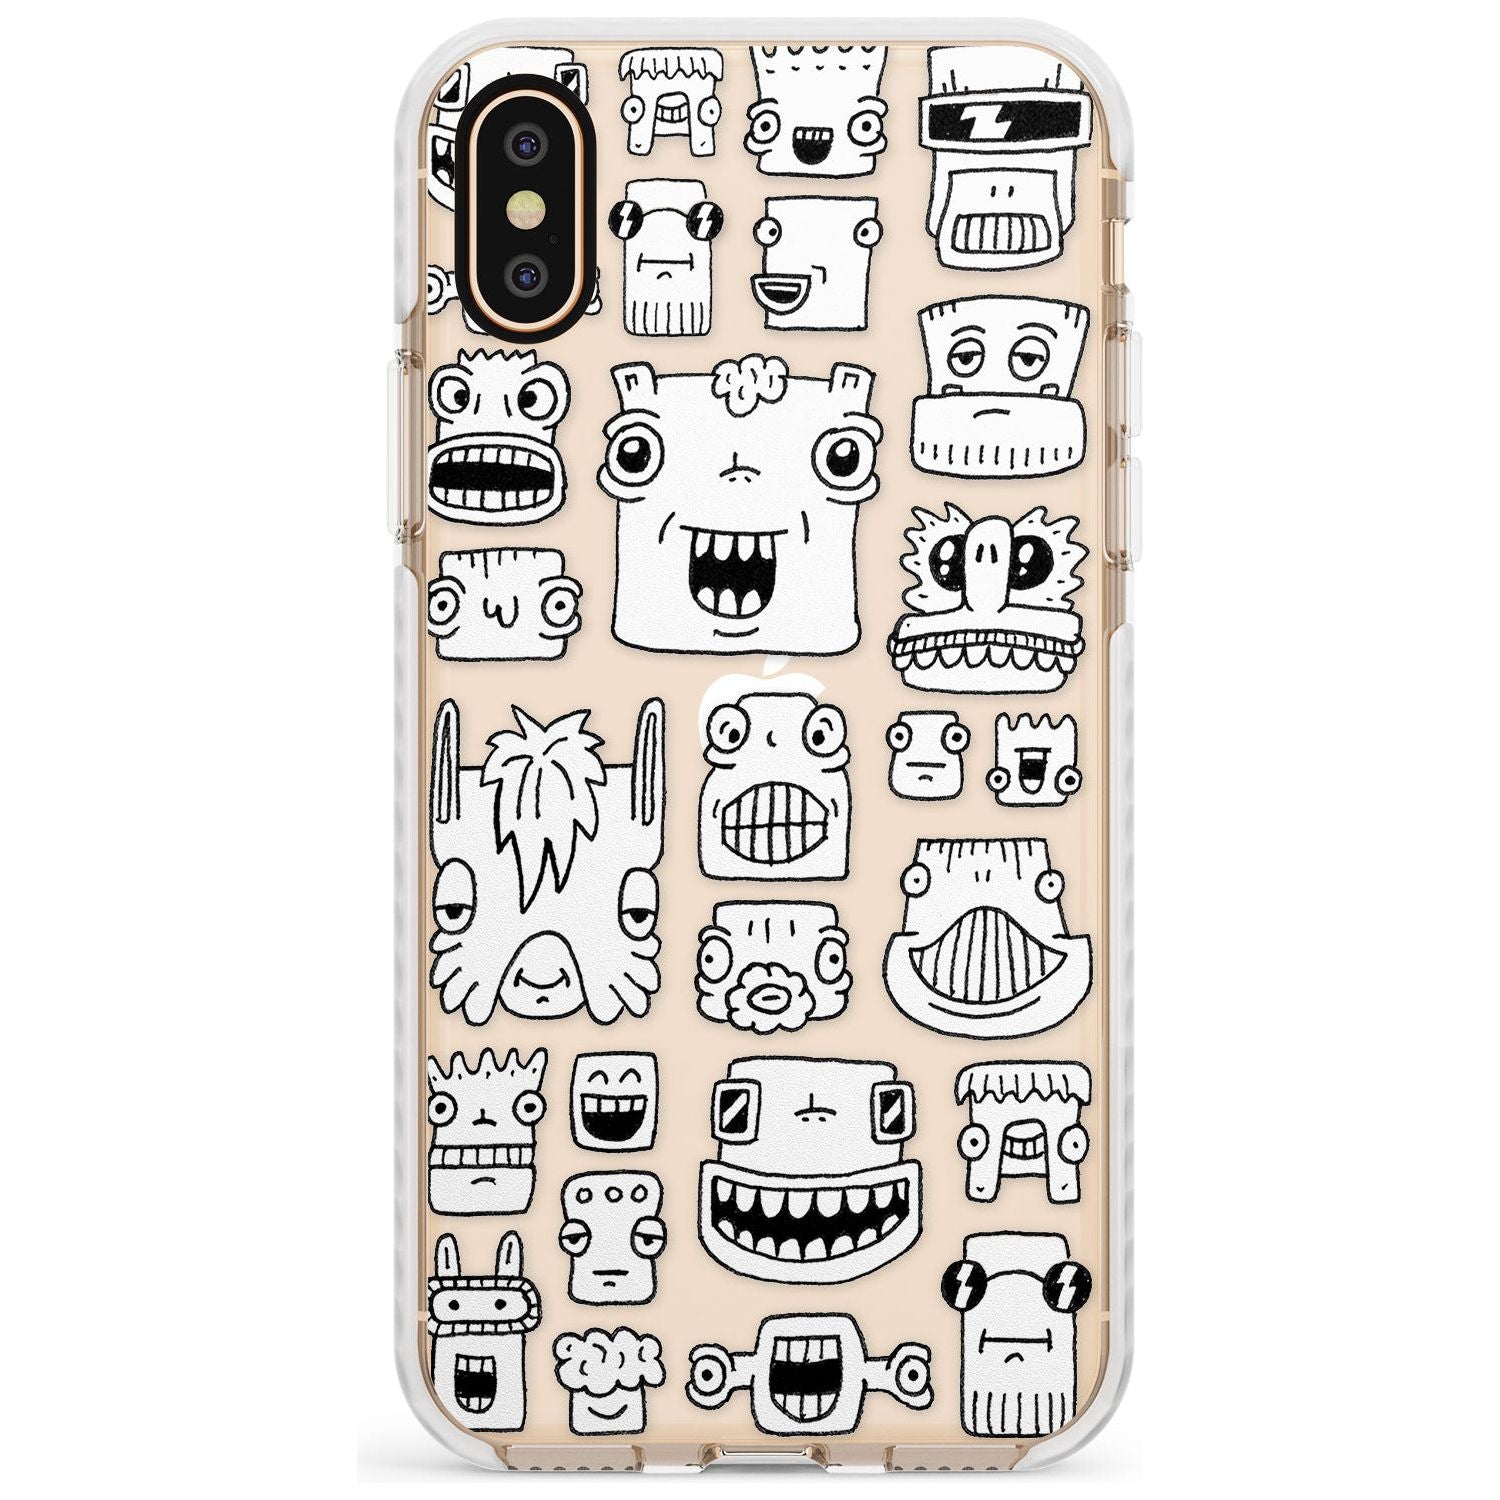 Burst Heads Impact Phone Case for iPhone X XS Max XR